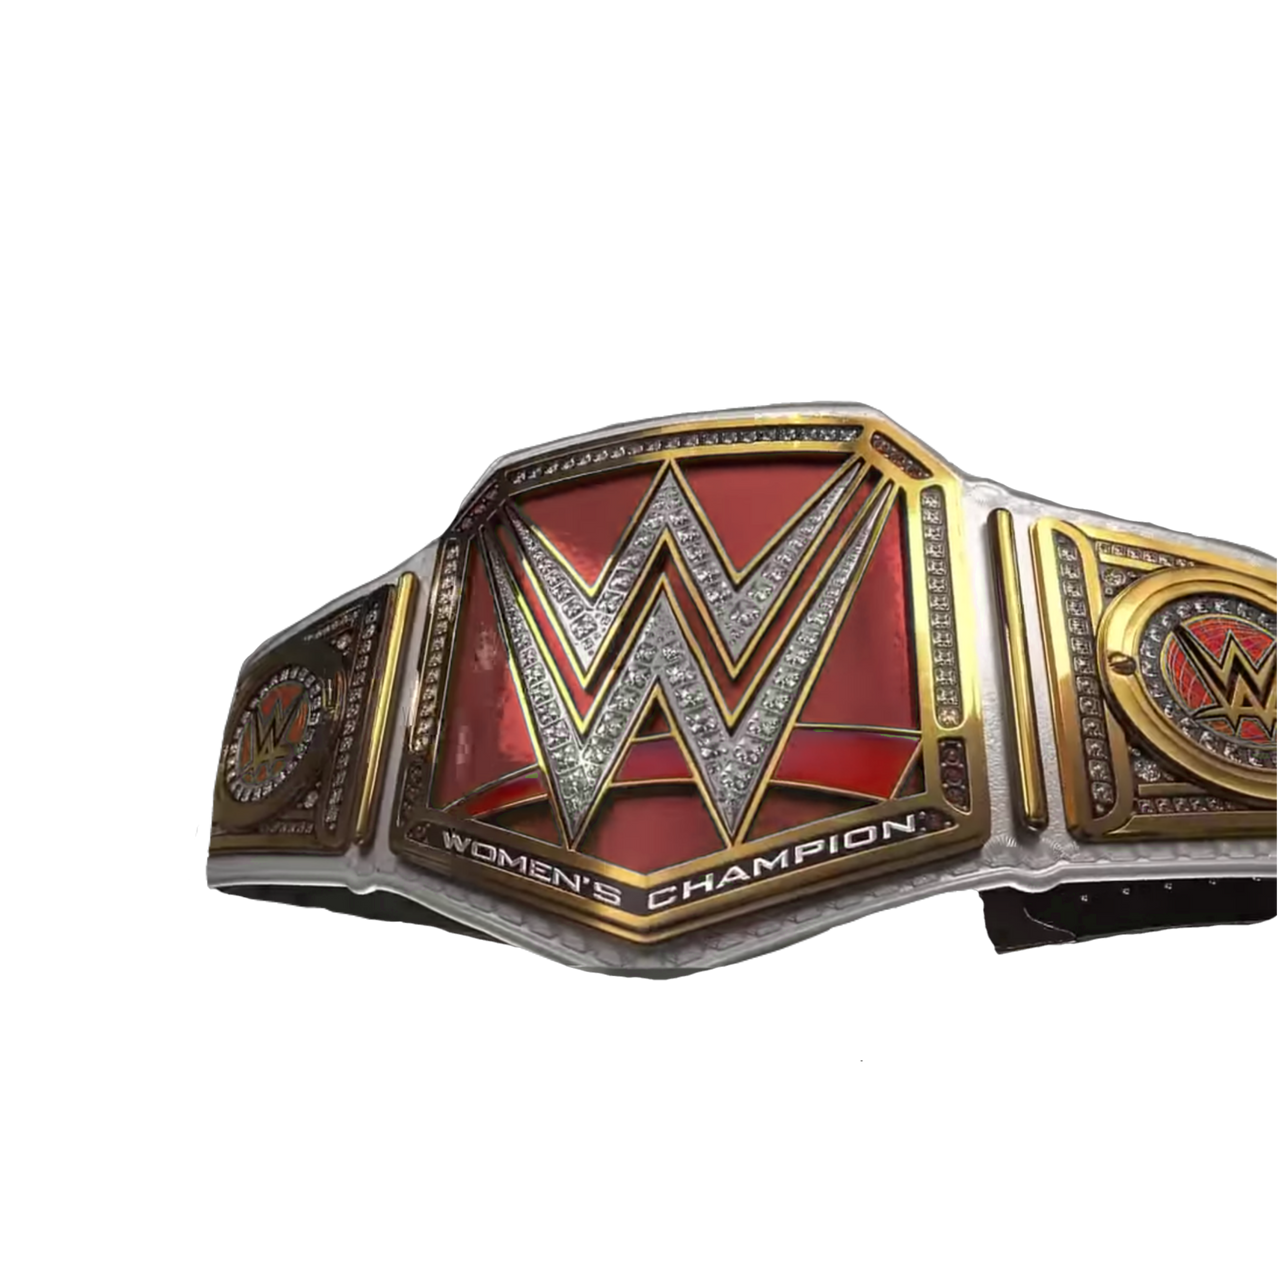 Raw Women S Championship Png By Parsahardy By Parsahardy On Deviantart